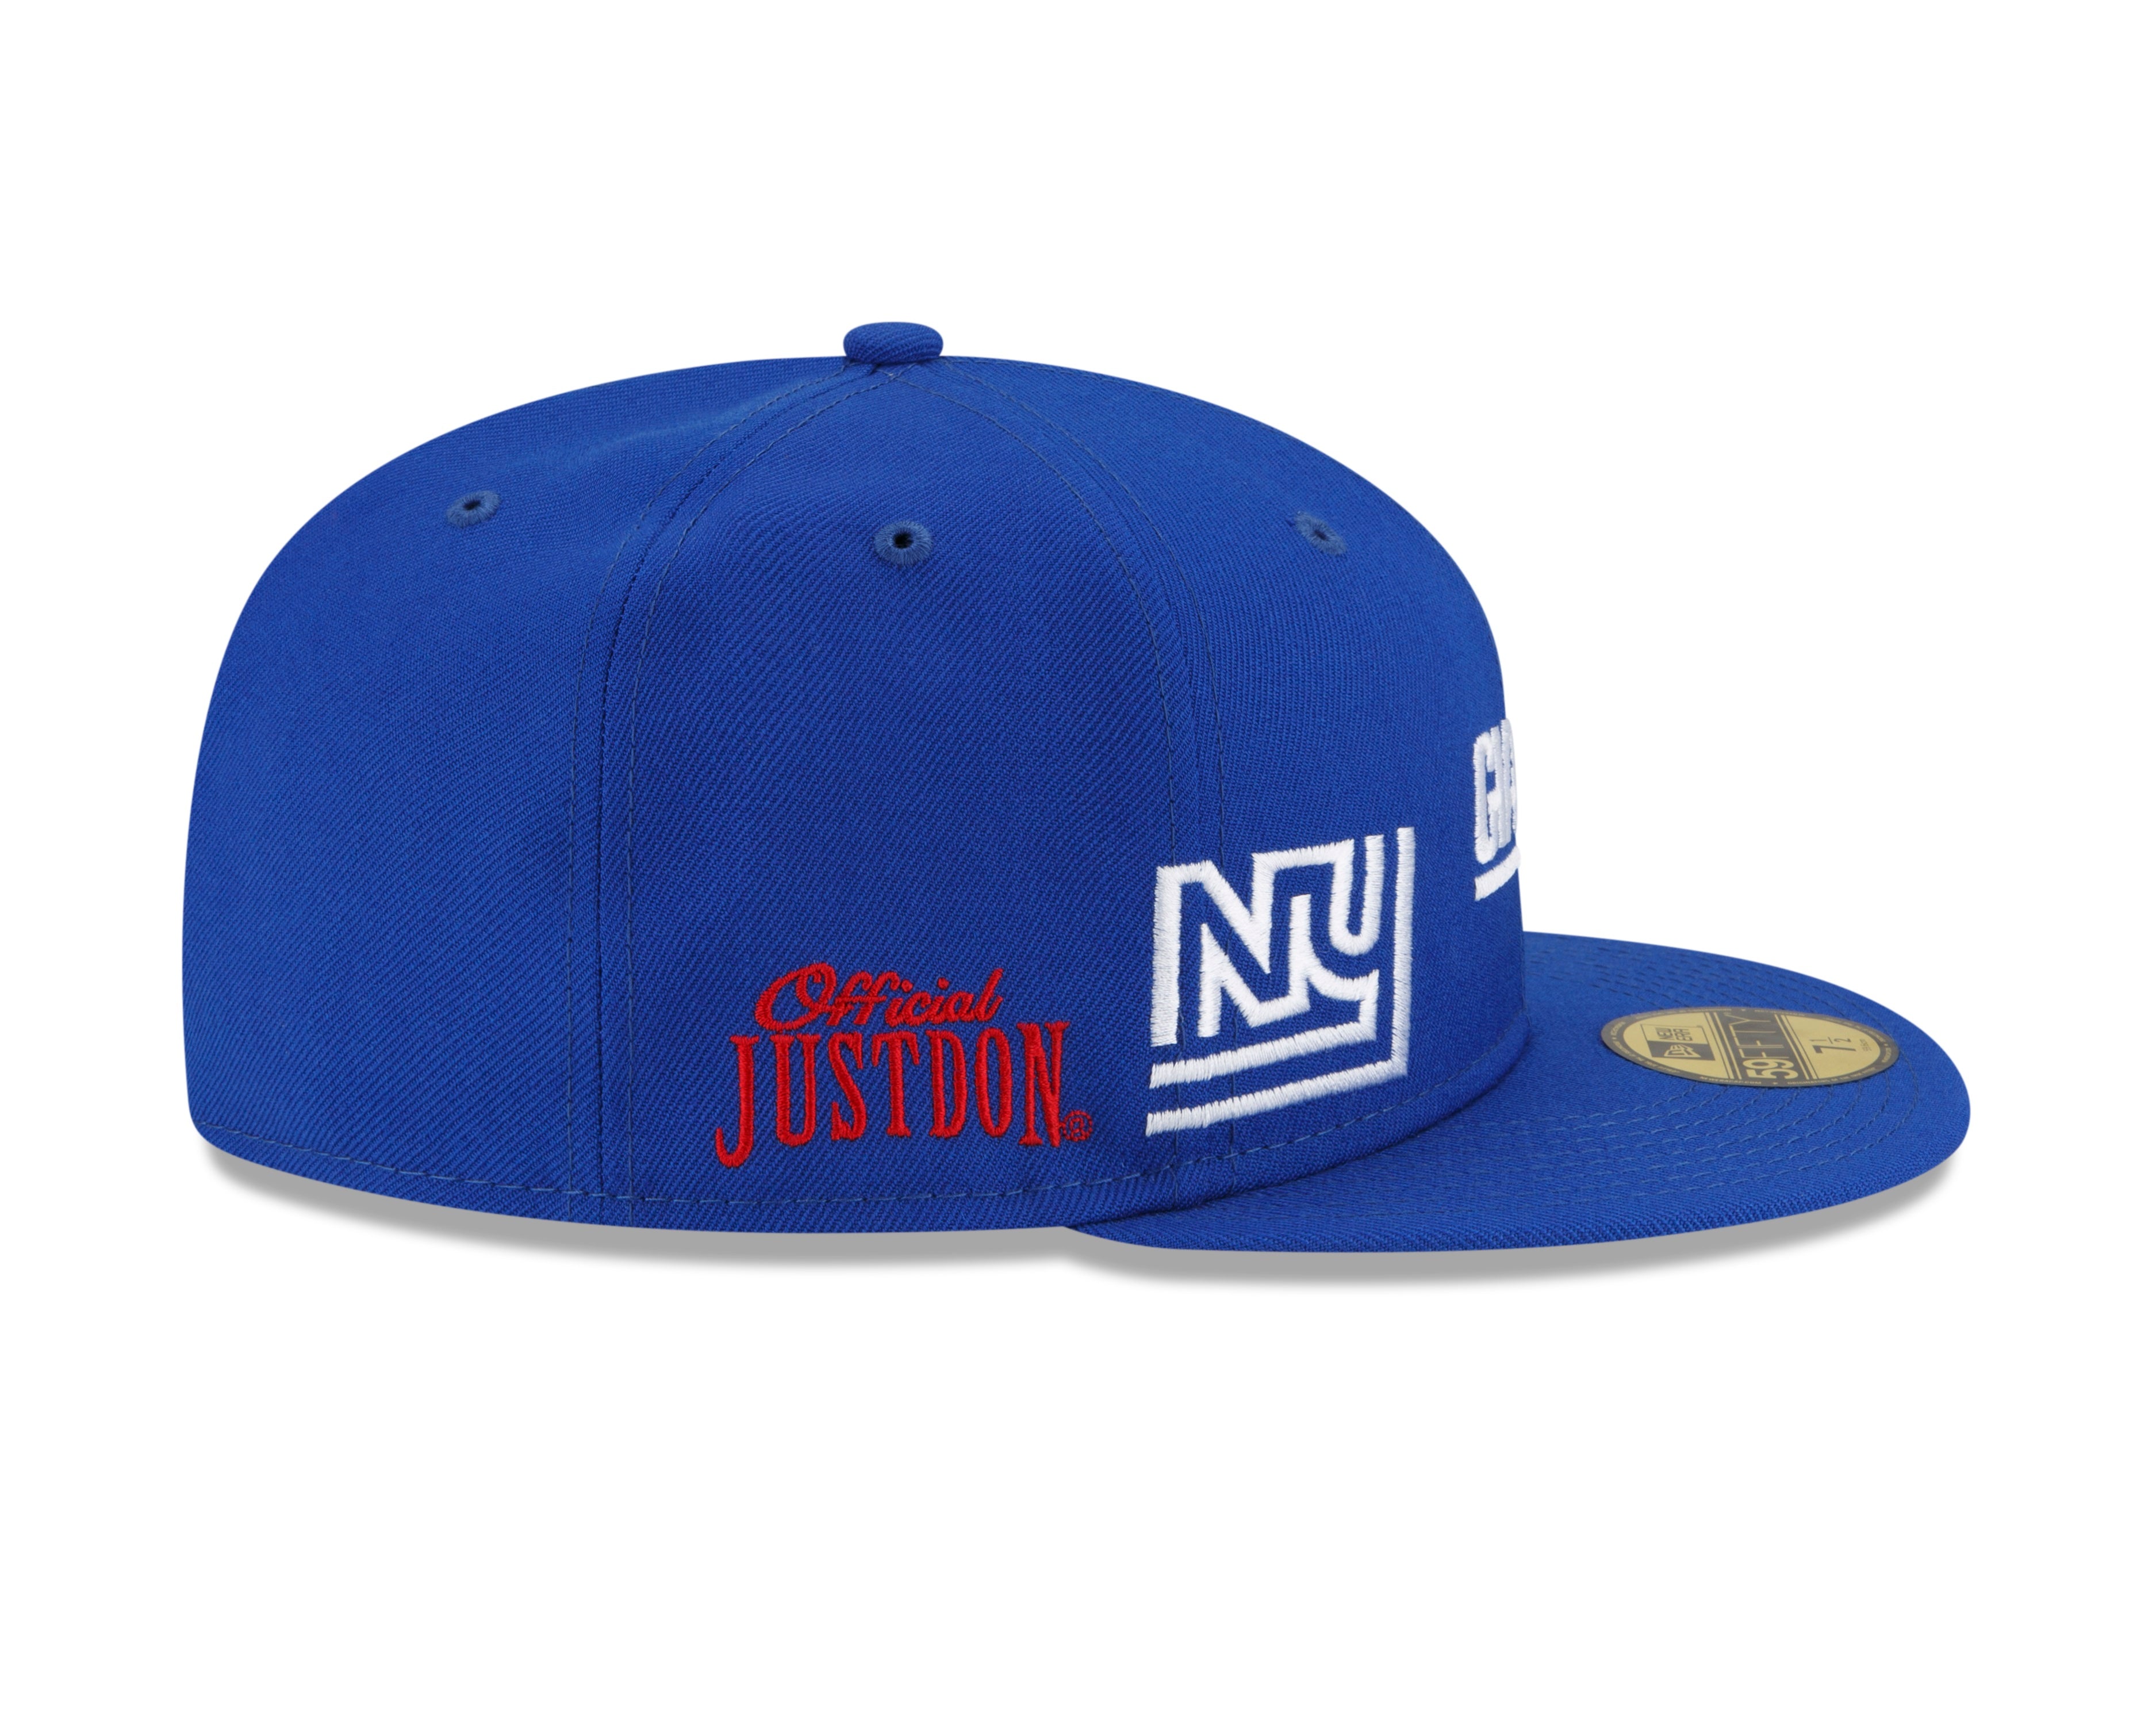 Shop New York Giants Snapback Hats & Fitted NFL Caps